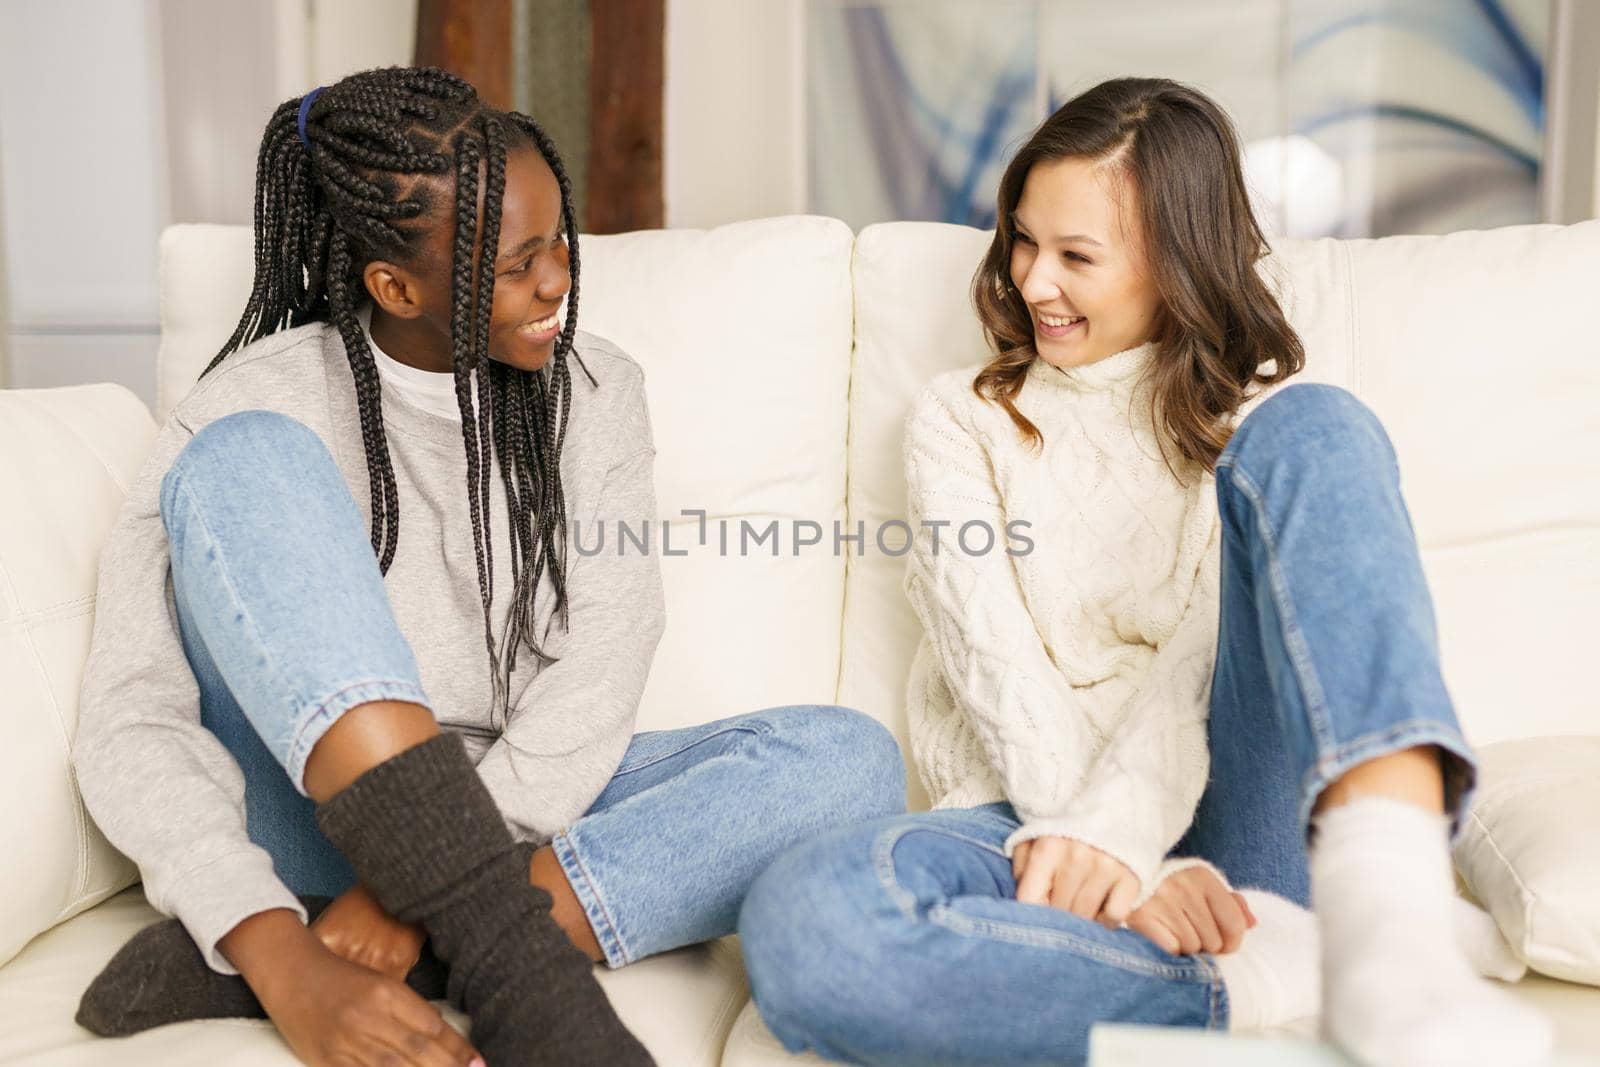 Two female student friends smiling together on the couch at home. Multiethnic women.